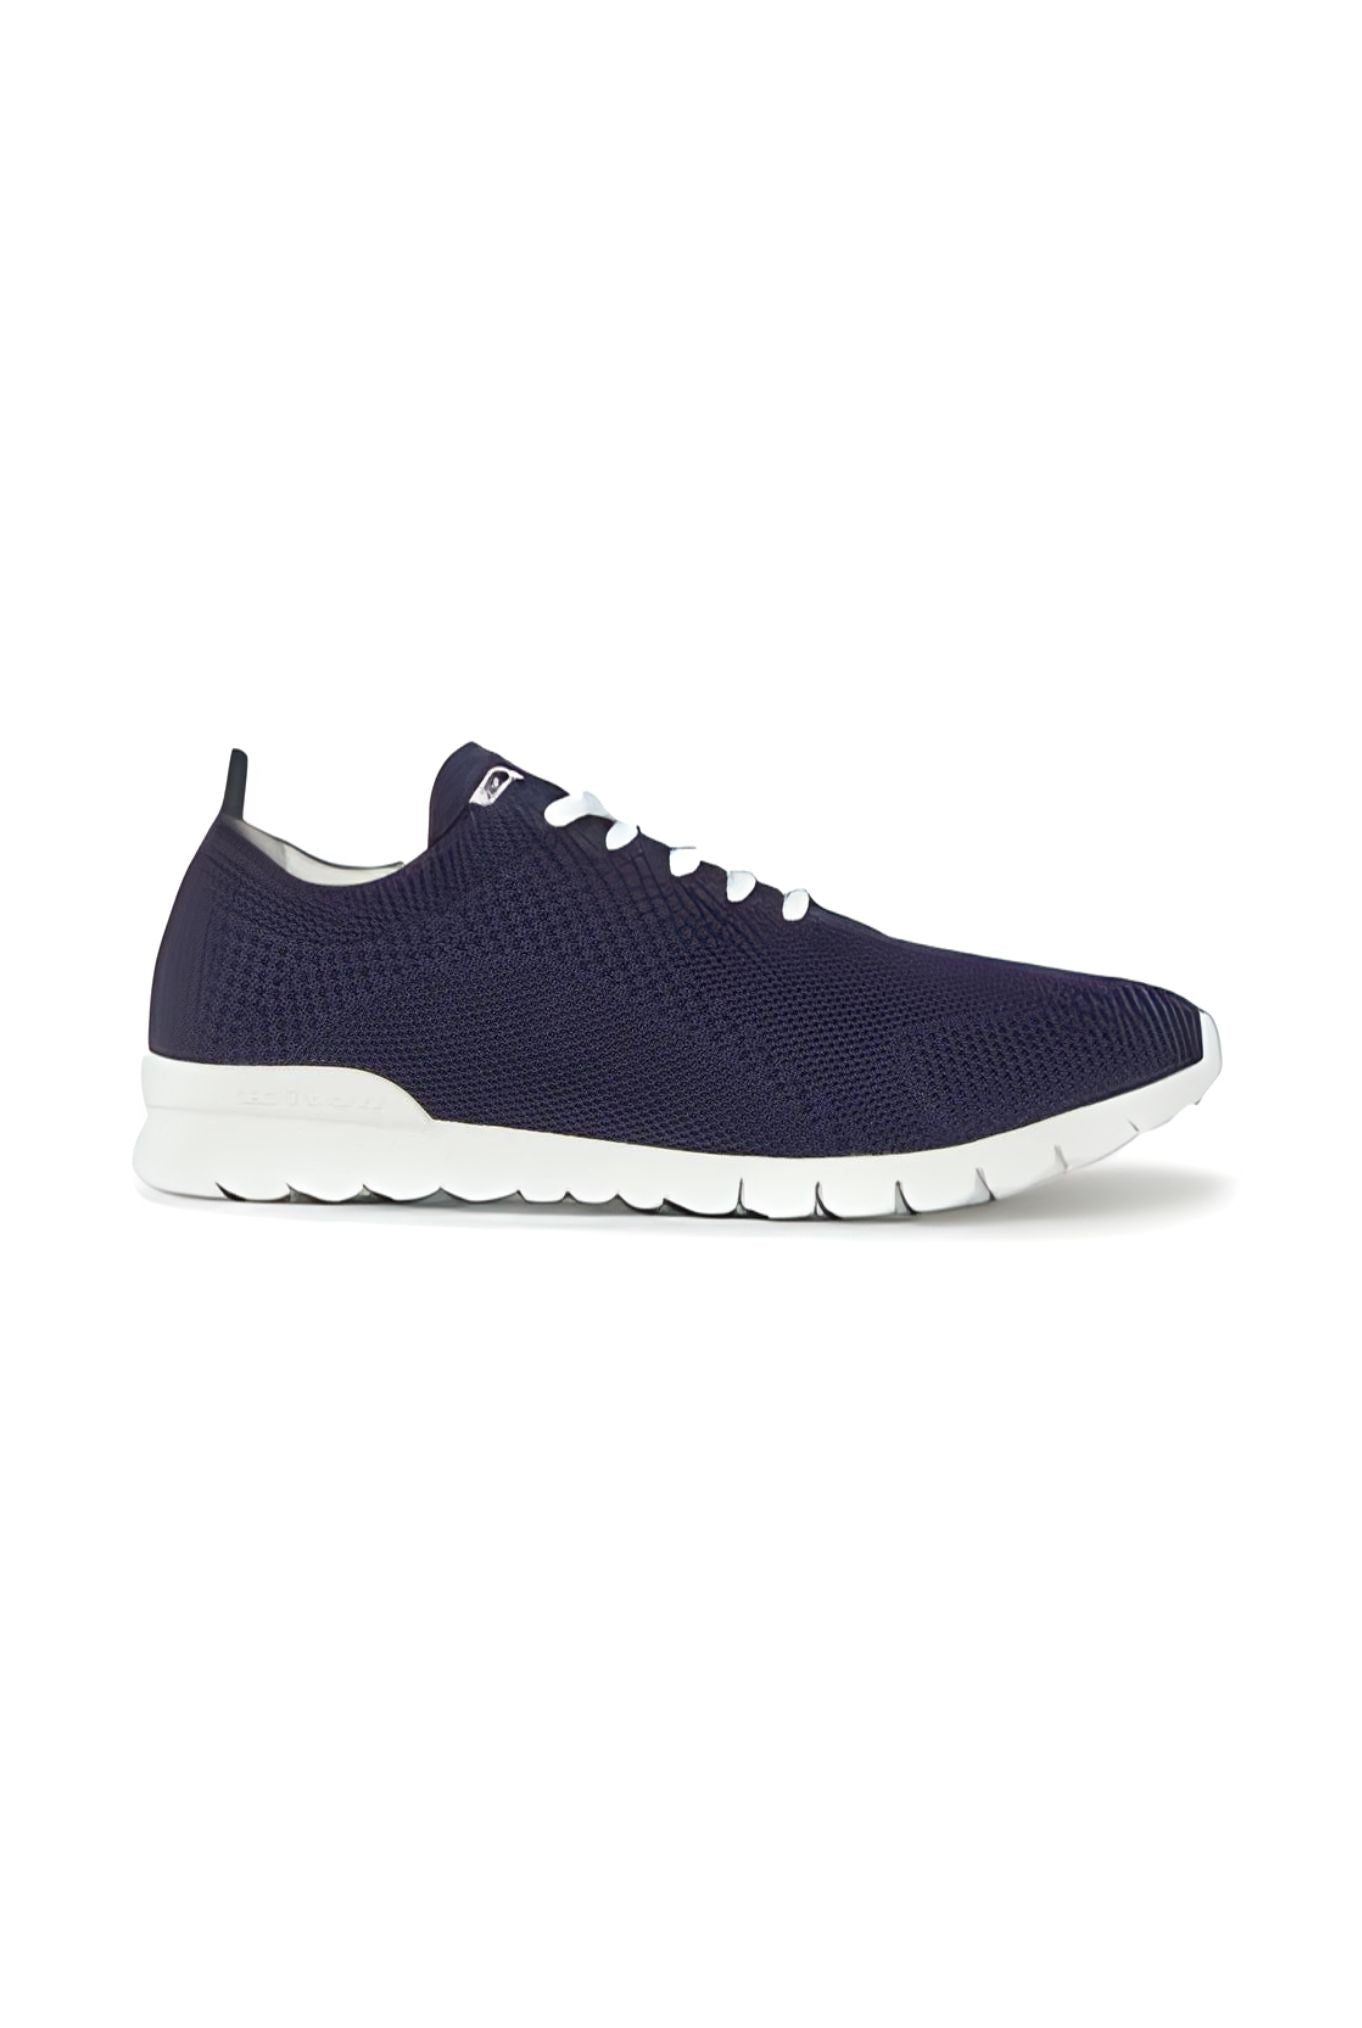 KITON Sneakers mod. Fit Navy Blue